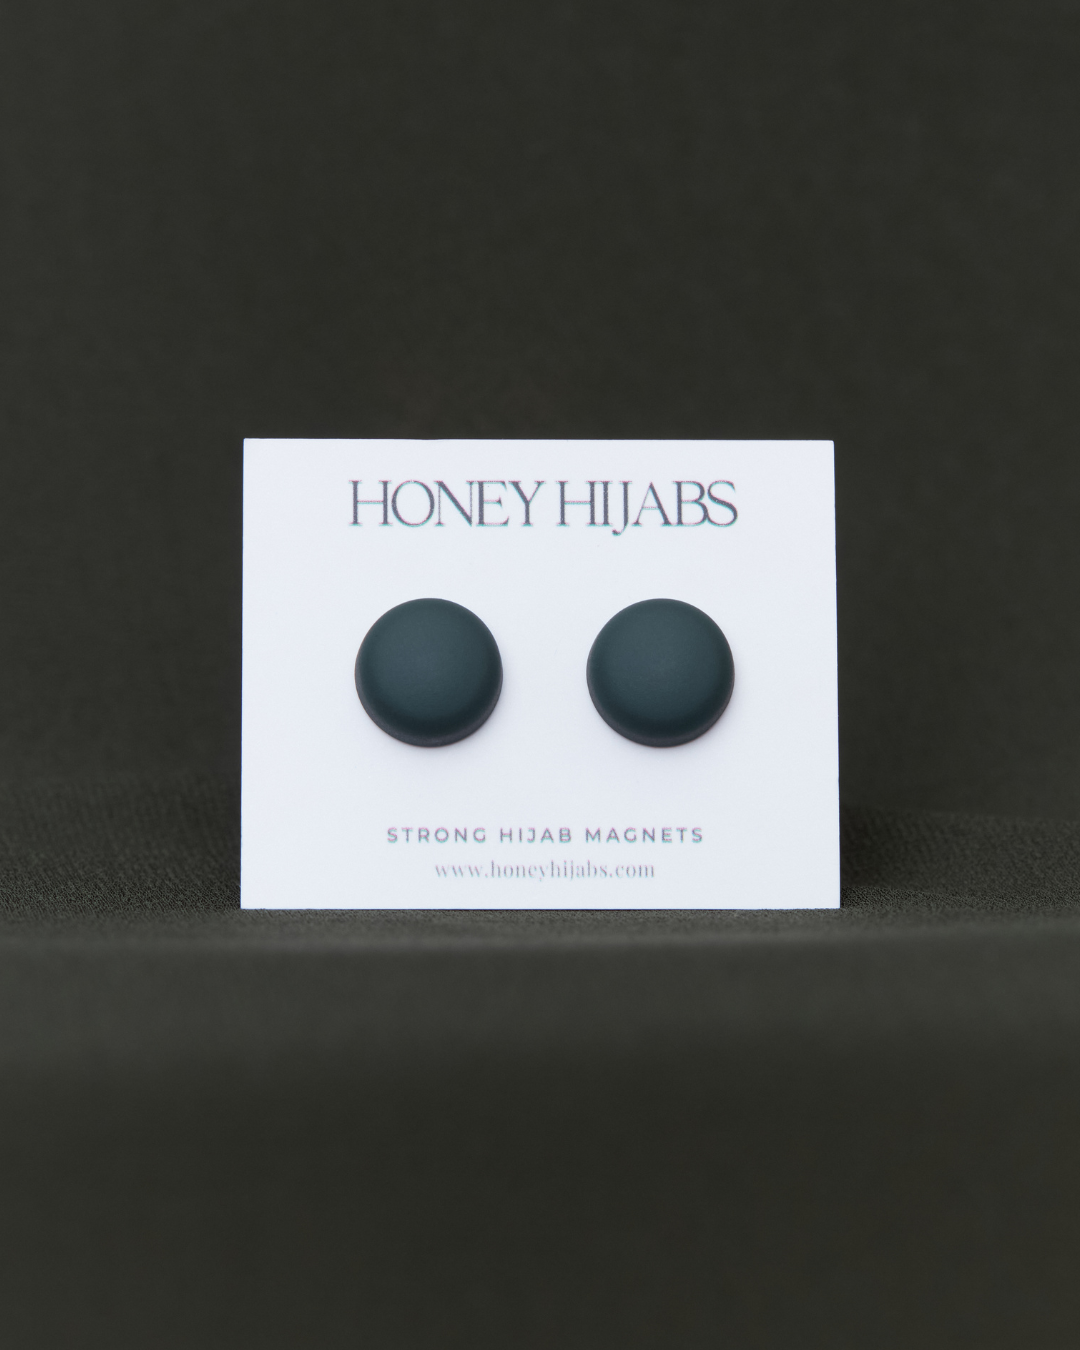 Stay fashionably secure with our hijab magnets that perfect your look. 🤎